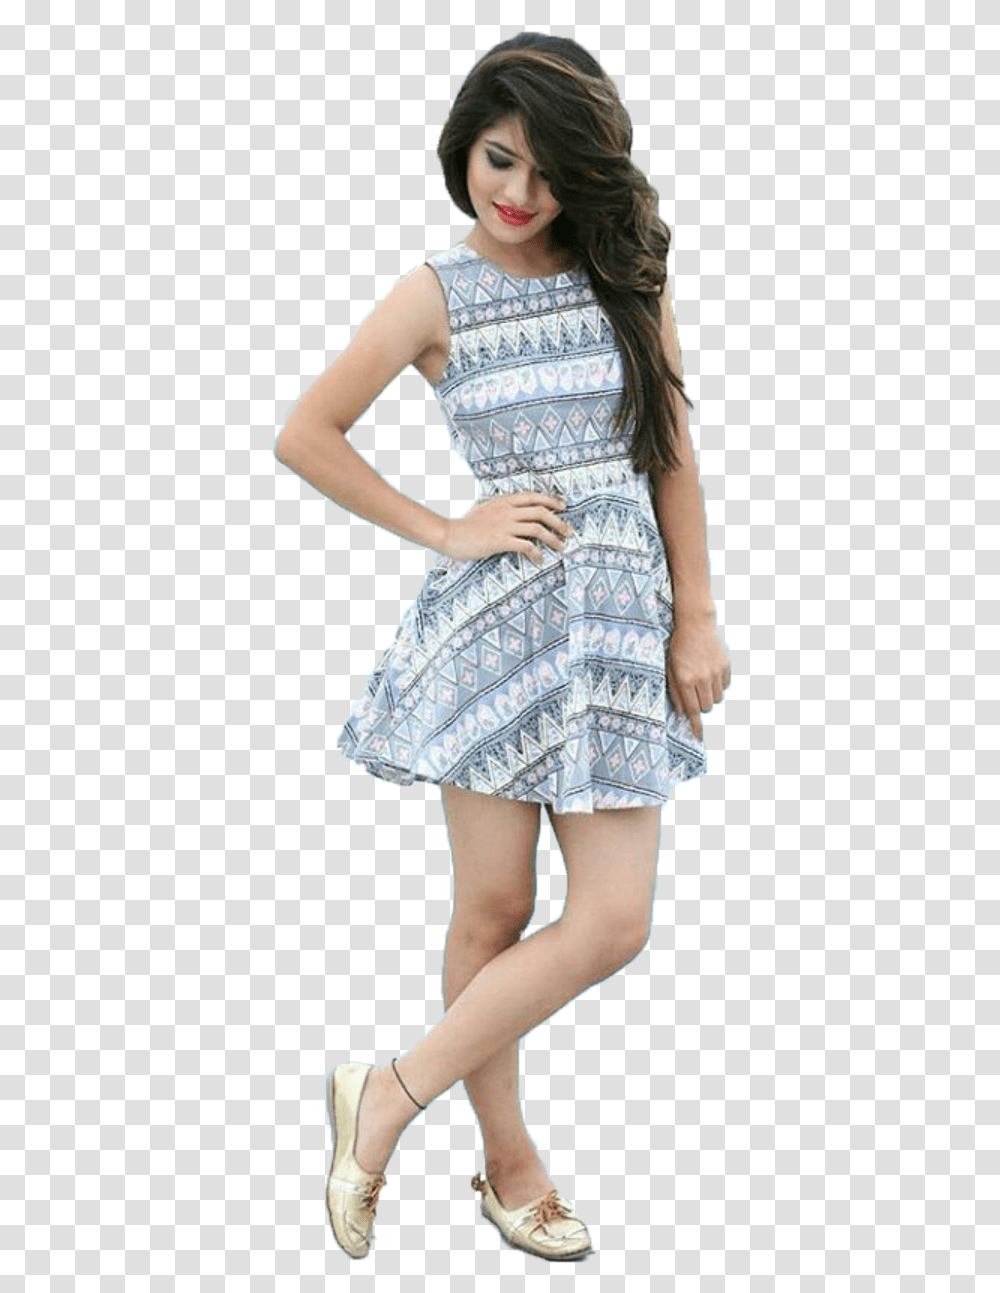 Second Method For Download More Girls Cb Background Girl Hd, Dress, Female, Person Transparent Png